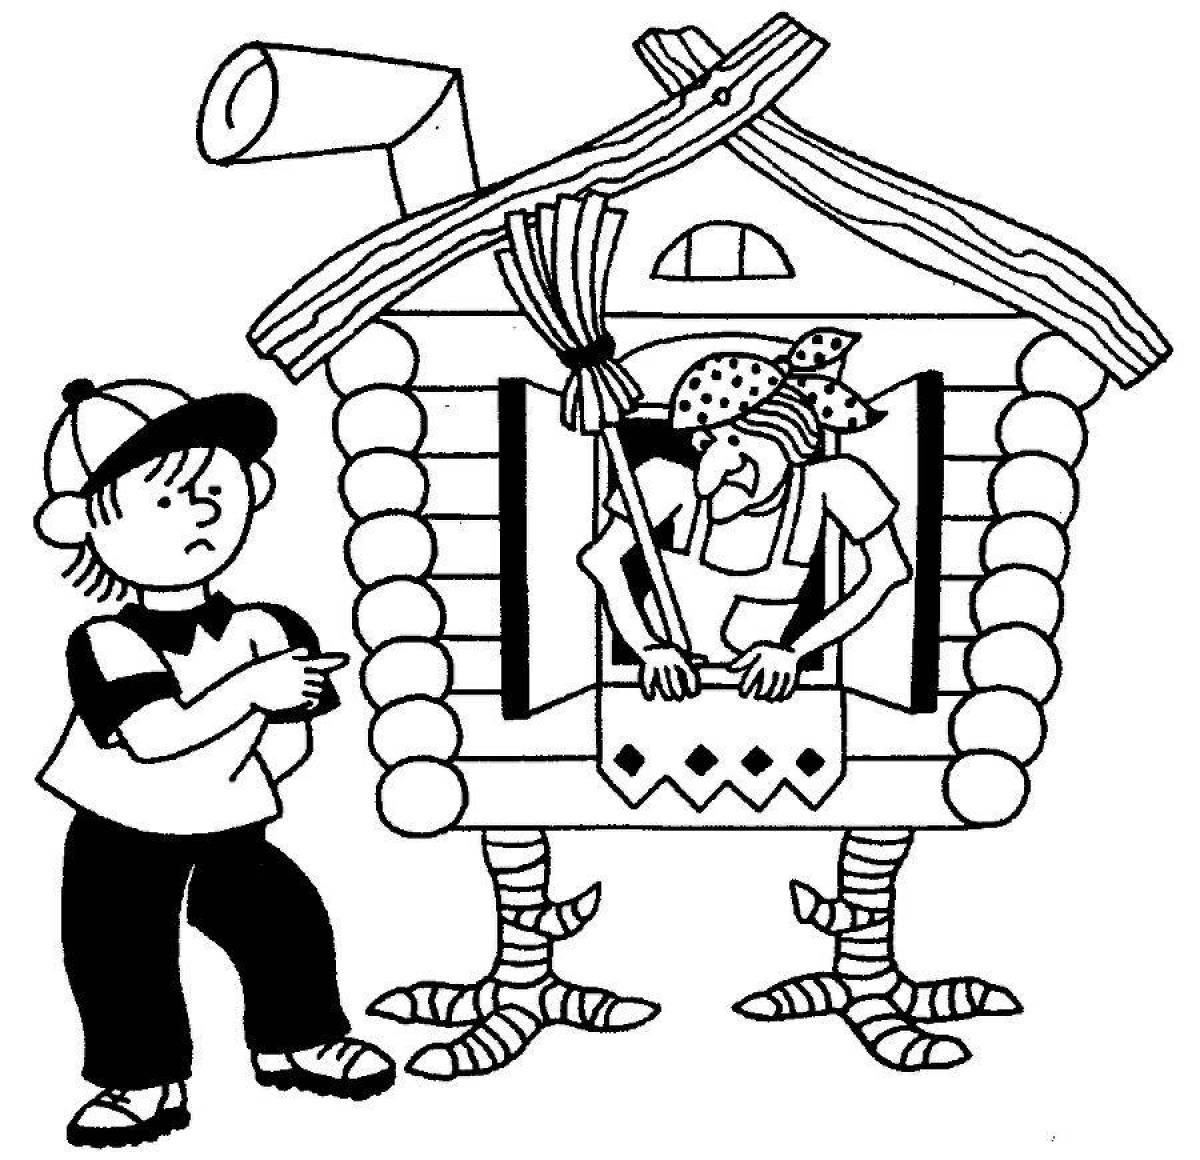 Coloring book exquisite baba yaga's hut